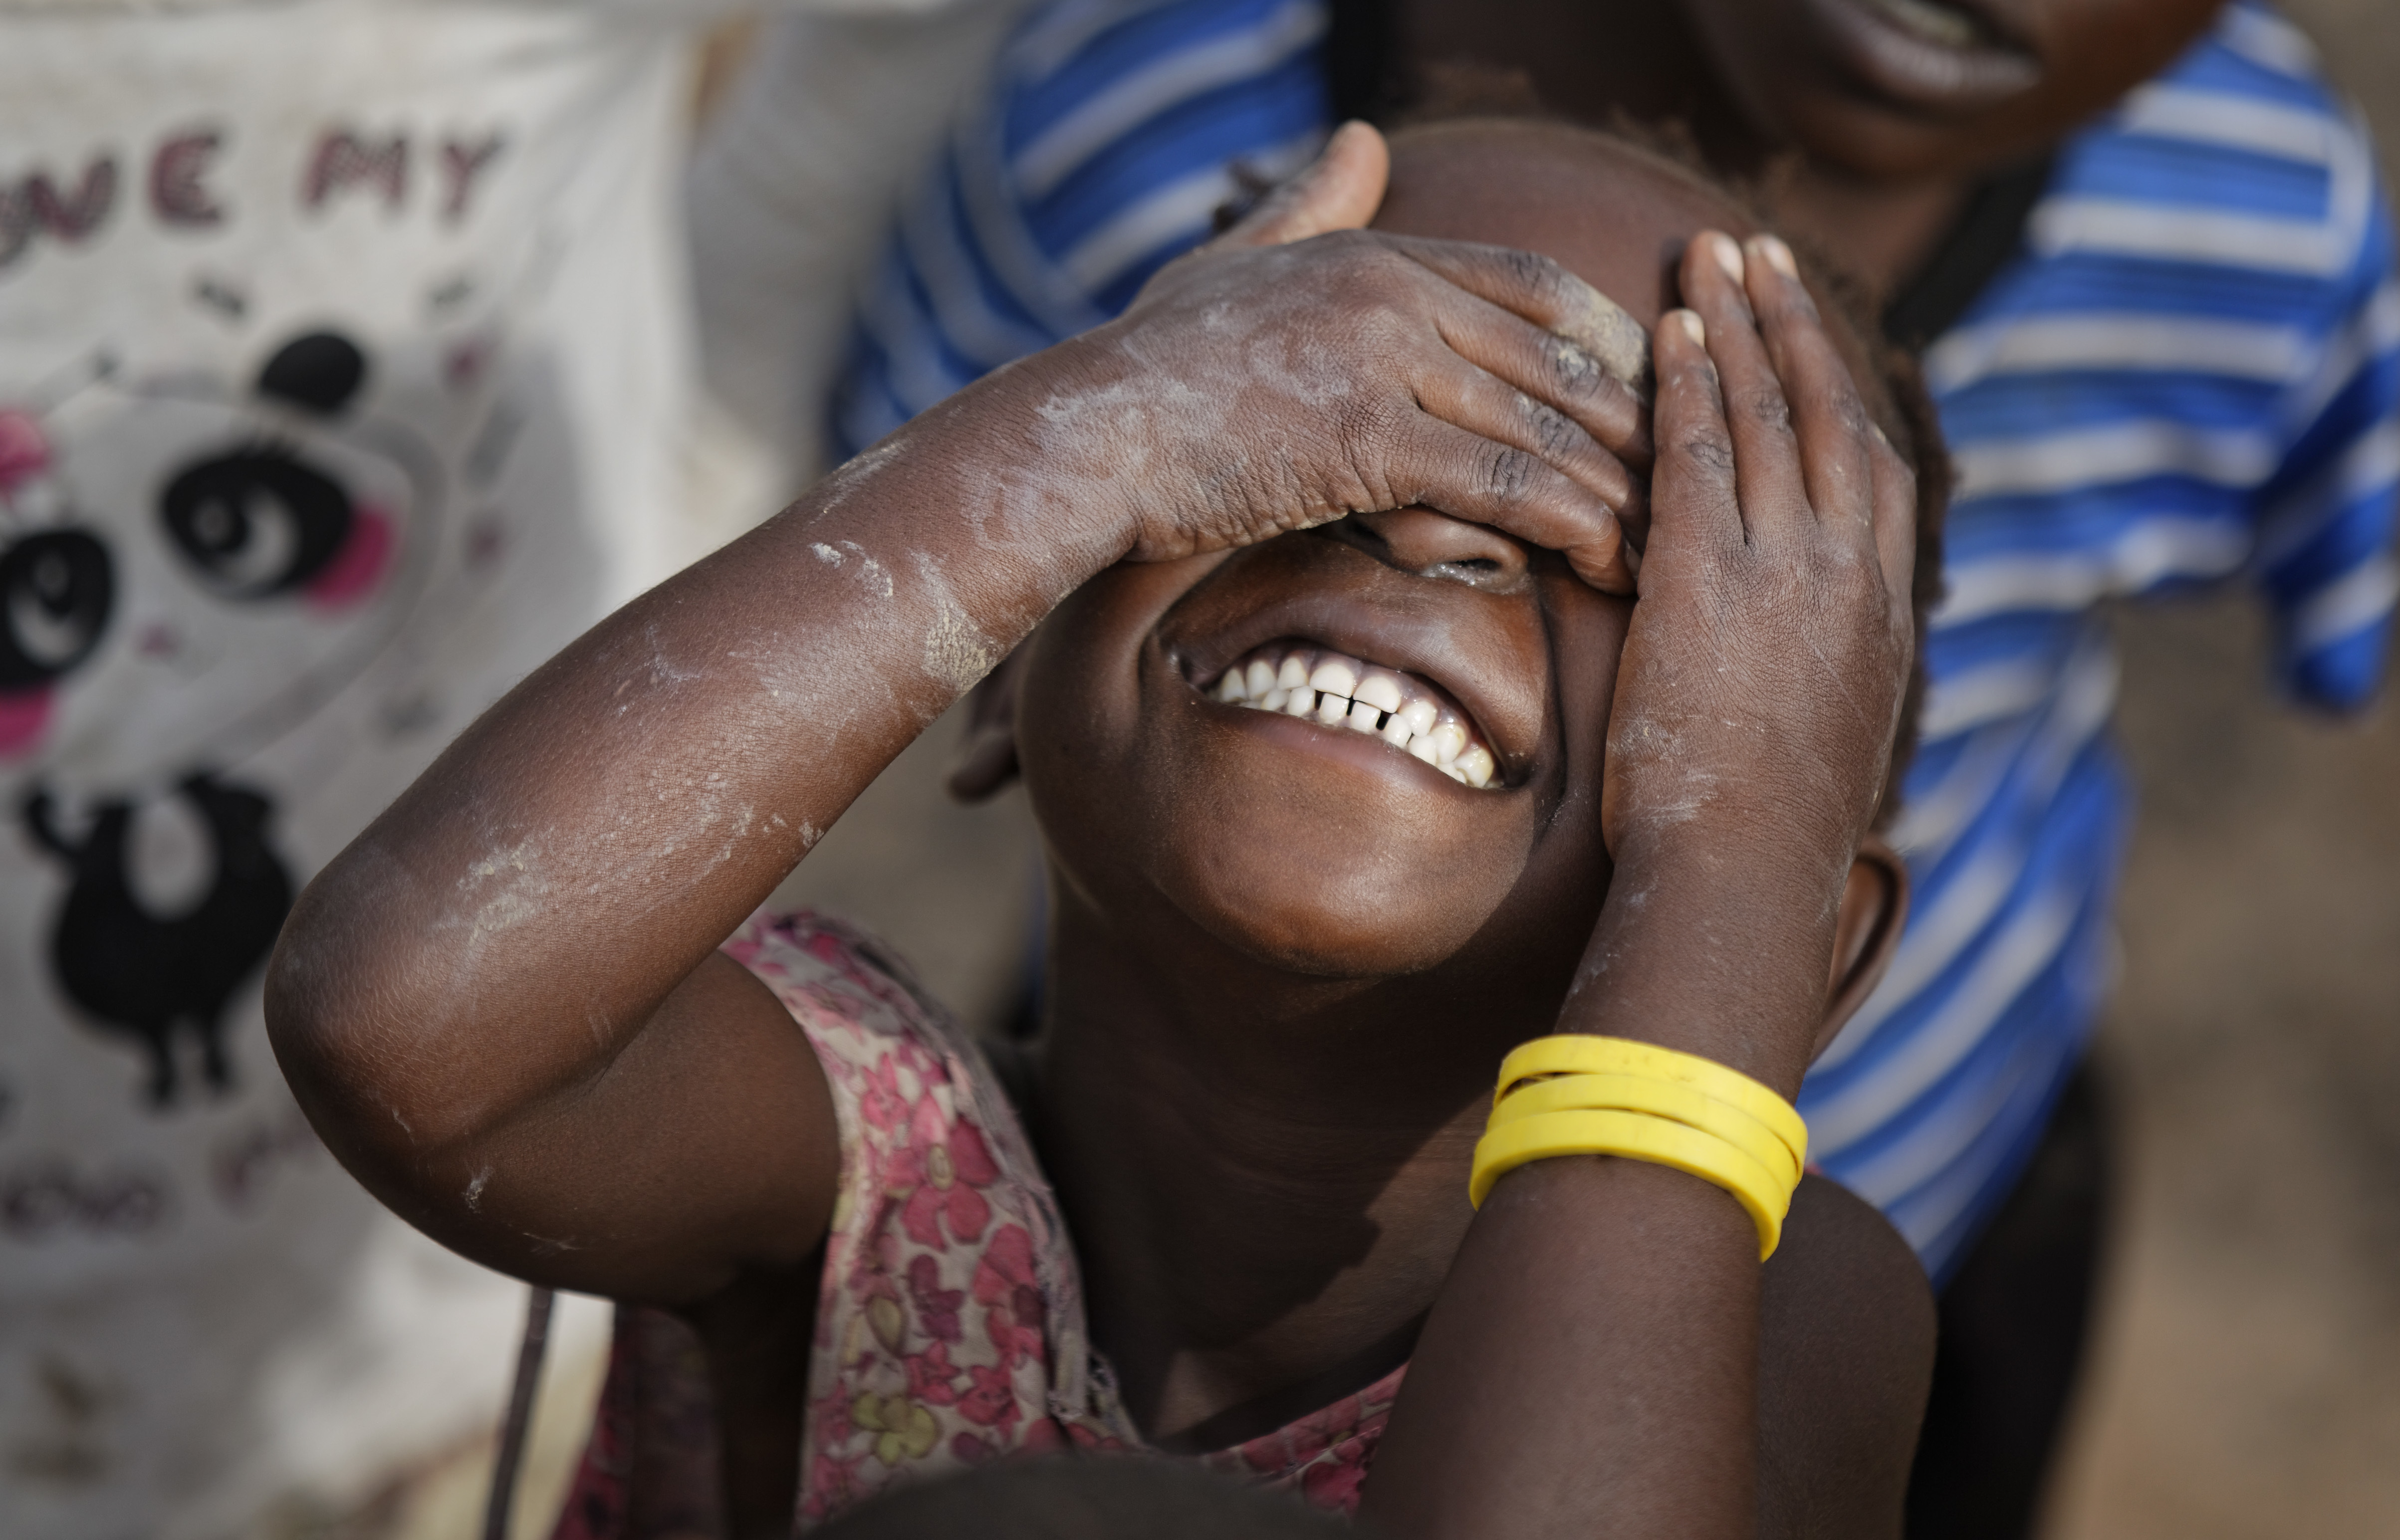 A young South Sudanese refugee girl laughs and hides her face from the camera during morning break in the yard of the Ombechi nursery school, which has over 500 pupils and is supported by UNICEF and Save the Children, in Bidi Bidi, Uganda Wednesday, June 7, 2017. Bidi Bidi is a sprawling complex of mud-brick houses that is now the world's largest refugee settlement holding some of those who fled the civil war in South Sudan, which has killed tens of thousands and driven out more than 1.5 million people in the past three years, creating the world's largest refugee crisis. (AP Photo/Ben Curtis)